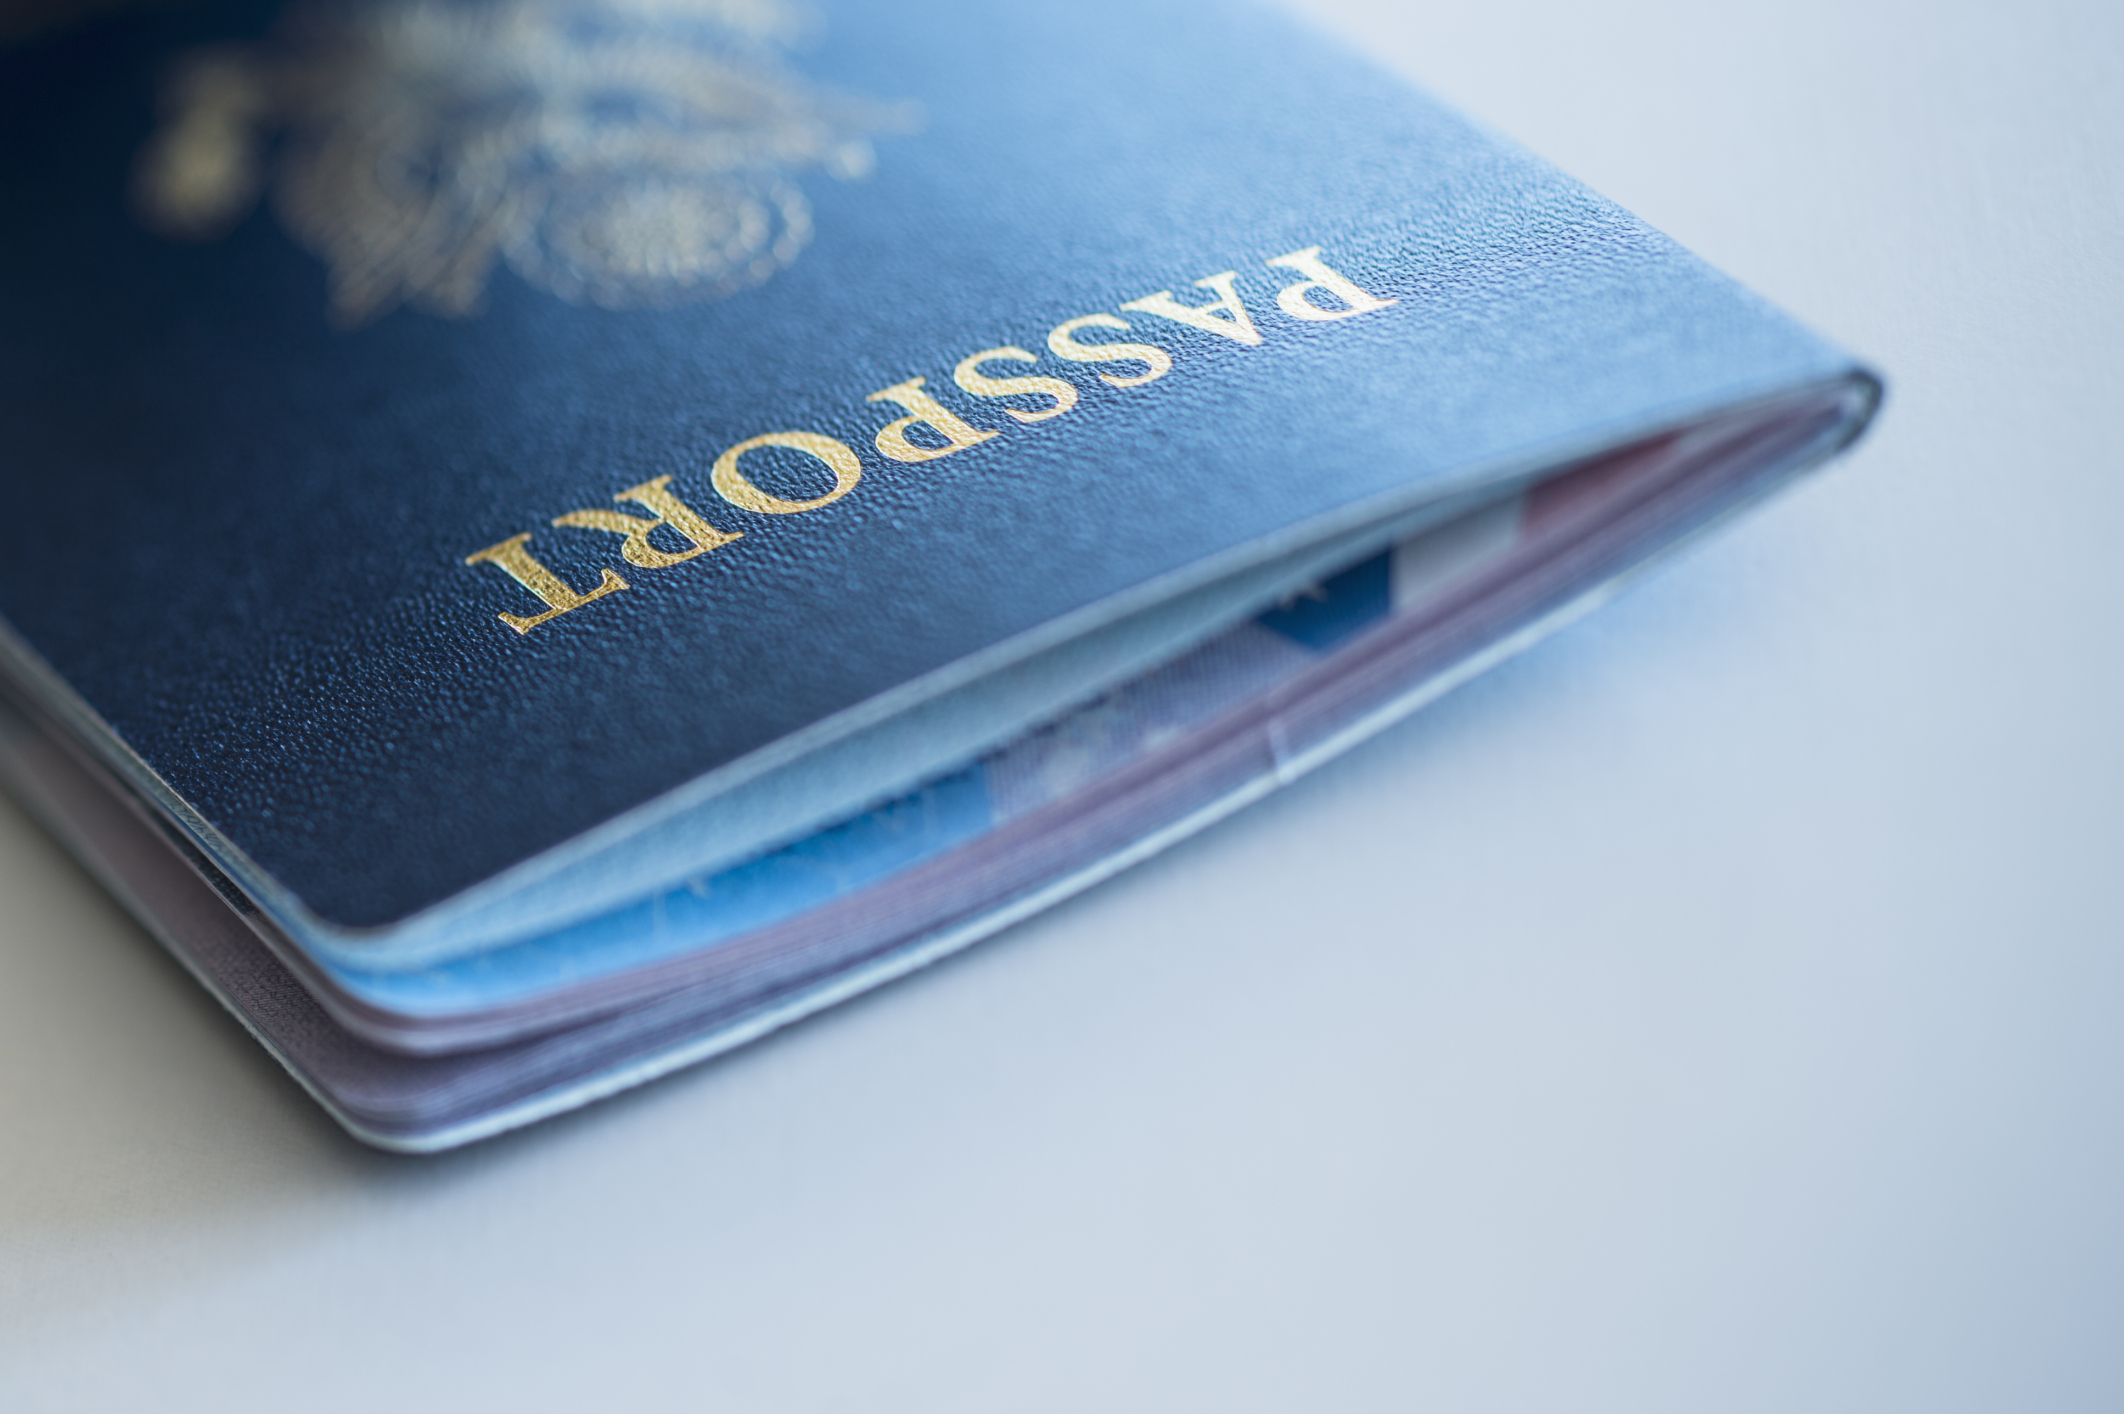 Why You Should Check Your Passport's Expiration Date Right Now